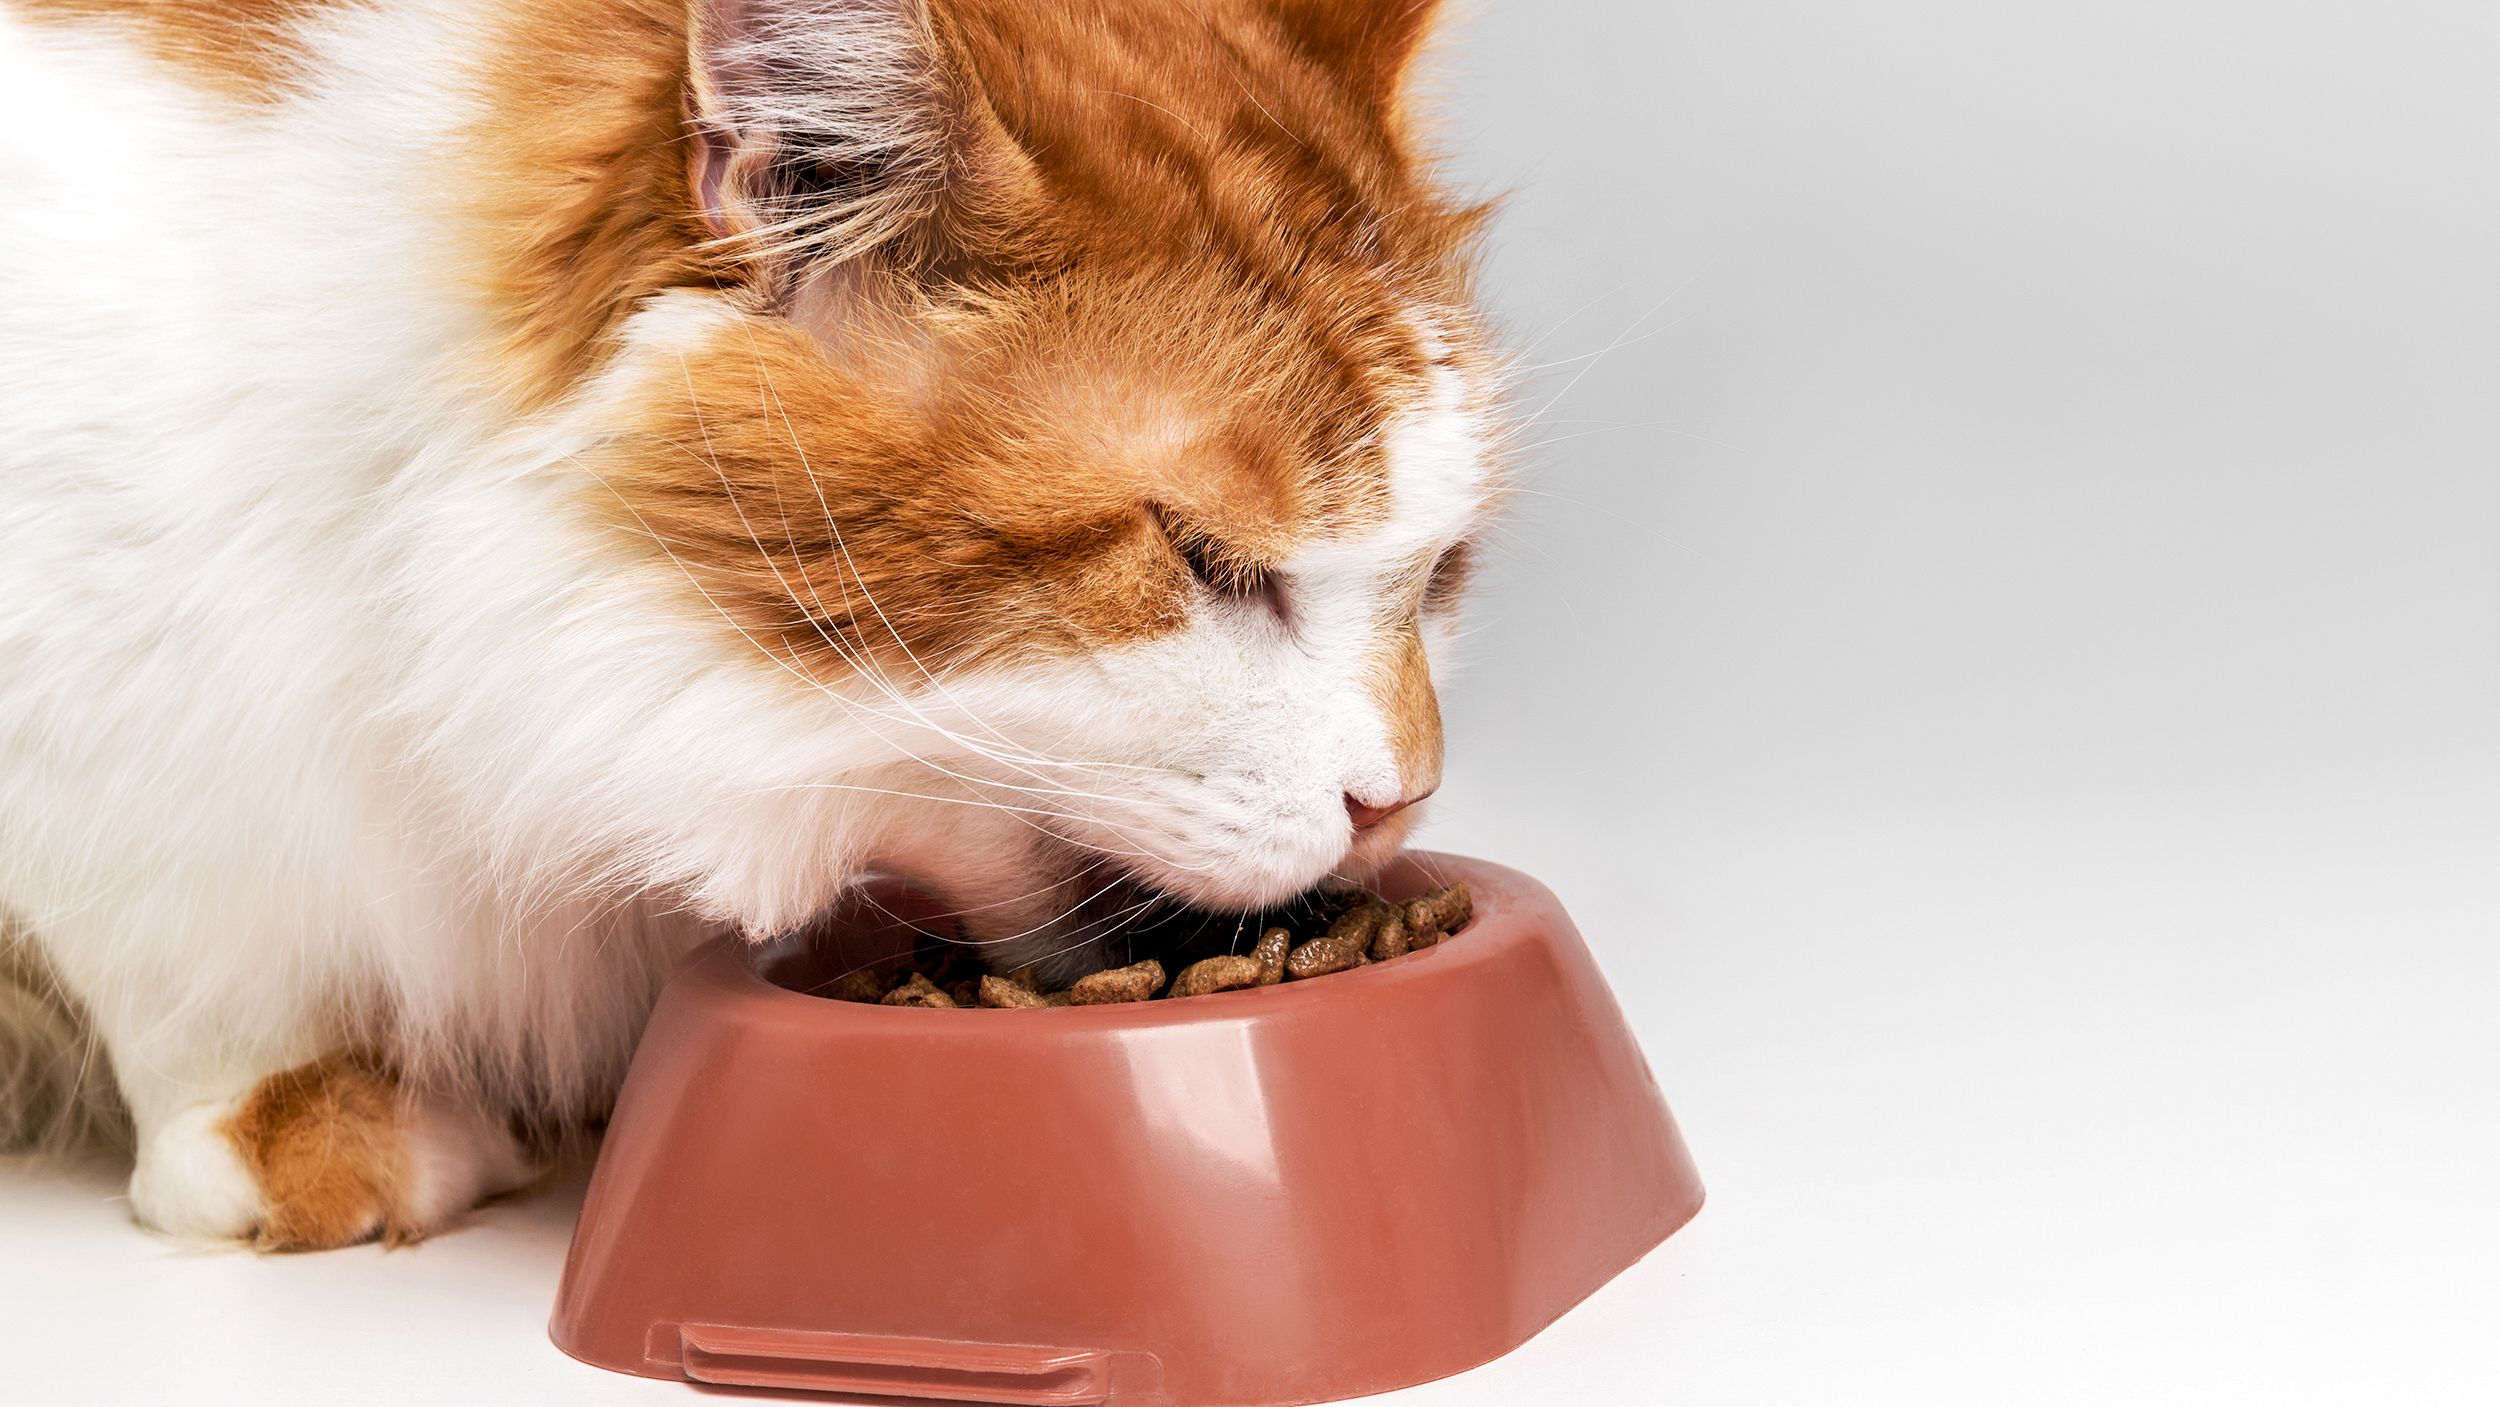 Adult cat standing indoors eating from a red bowl.